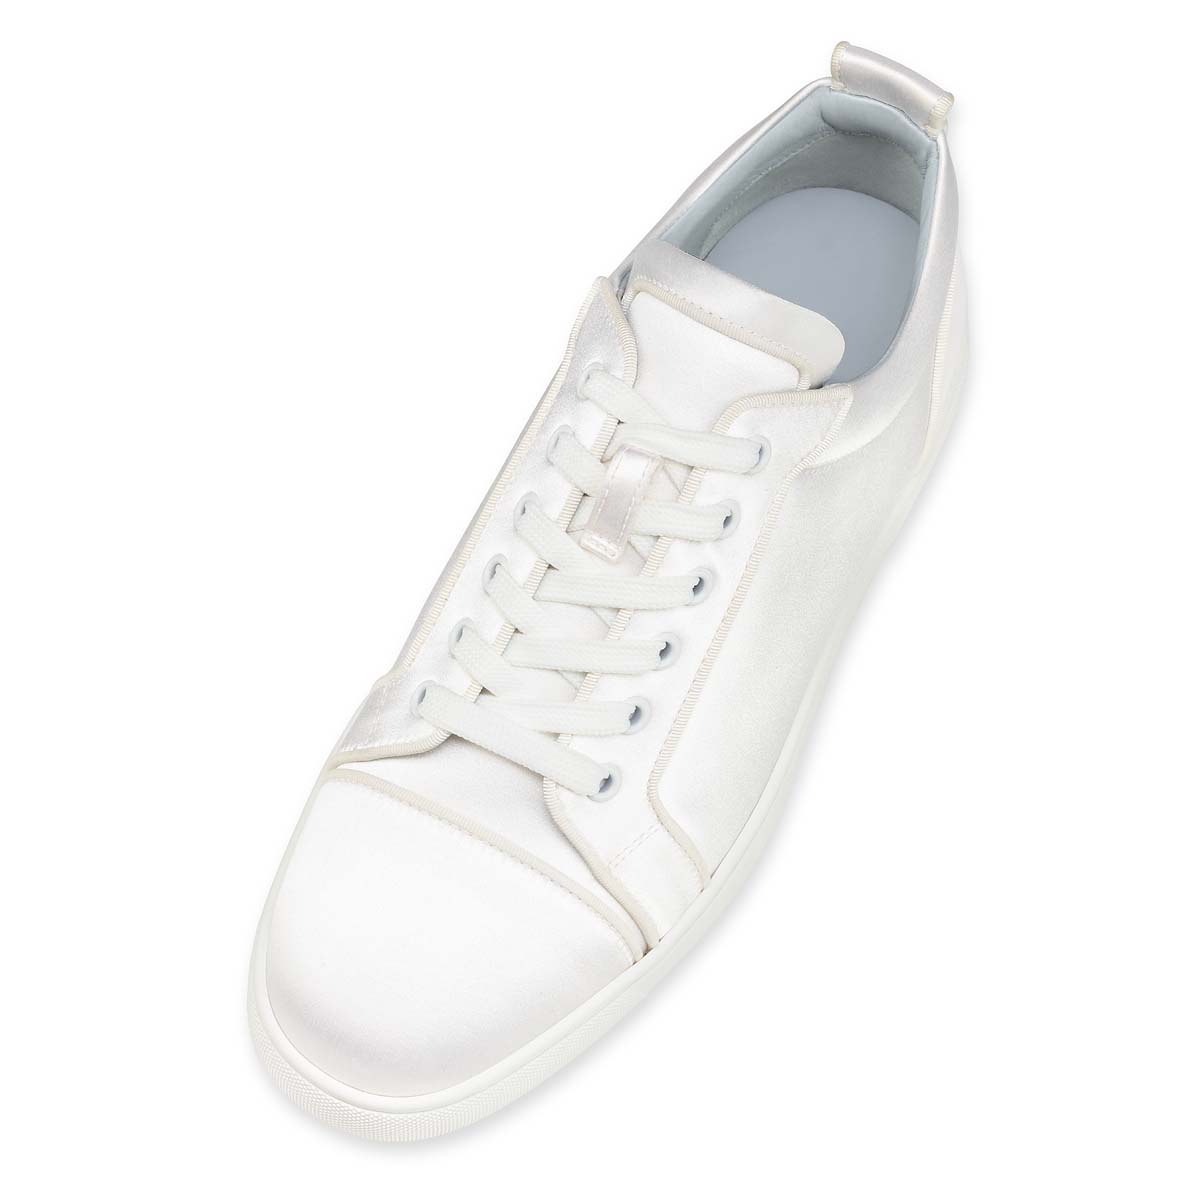 LOUIS JUNIOR OR 000 IVORY/LINING BLUE Silk - Shoes - Men 